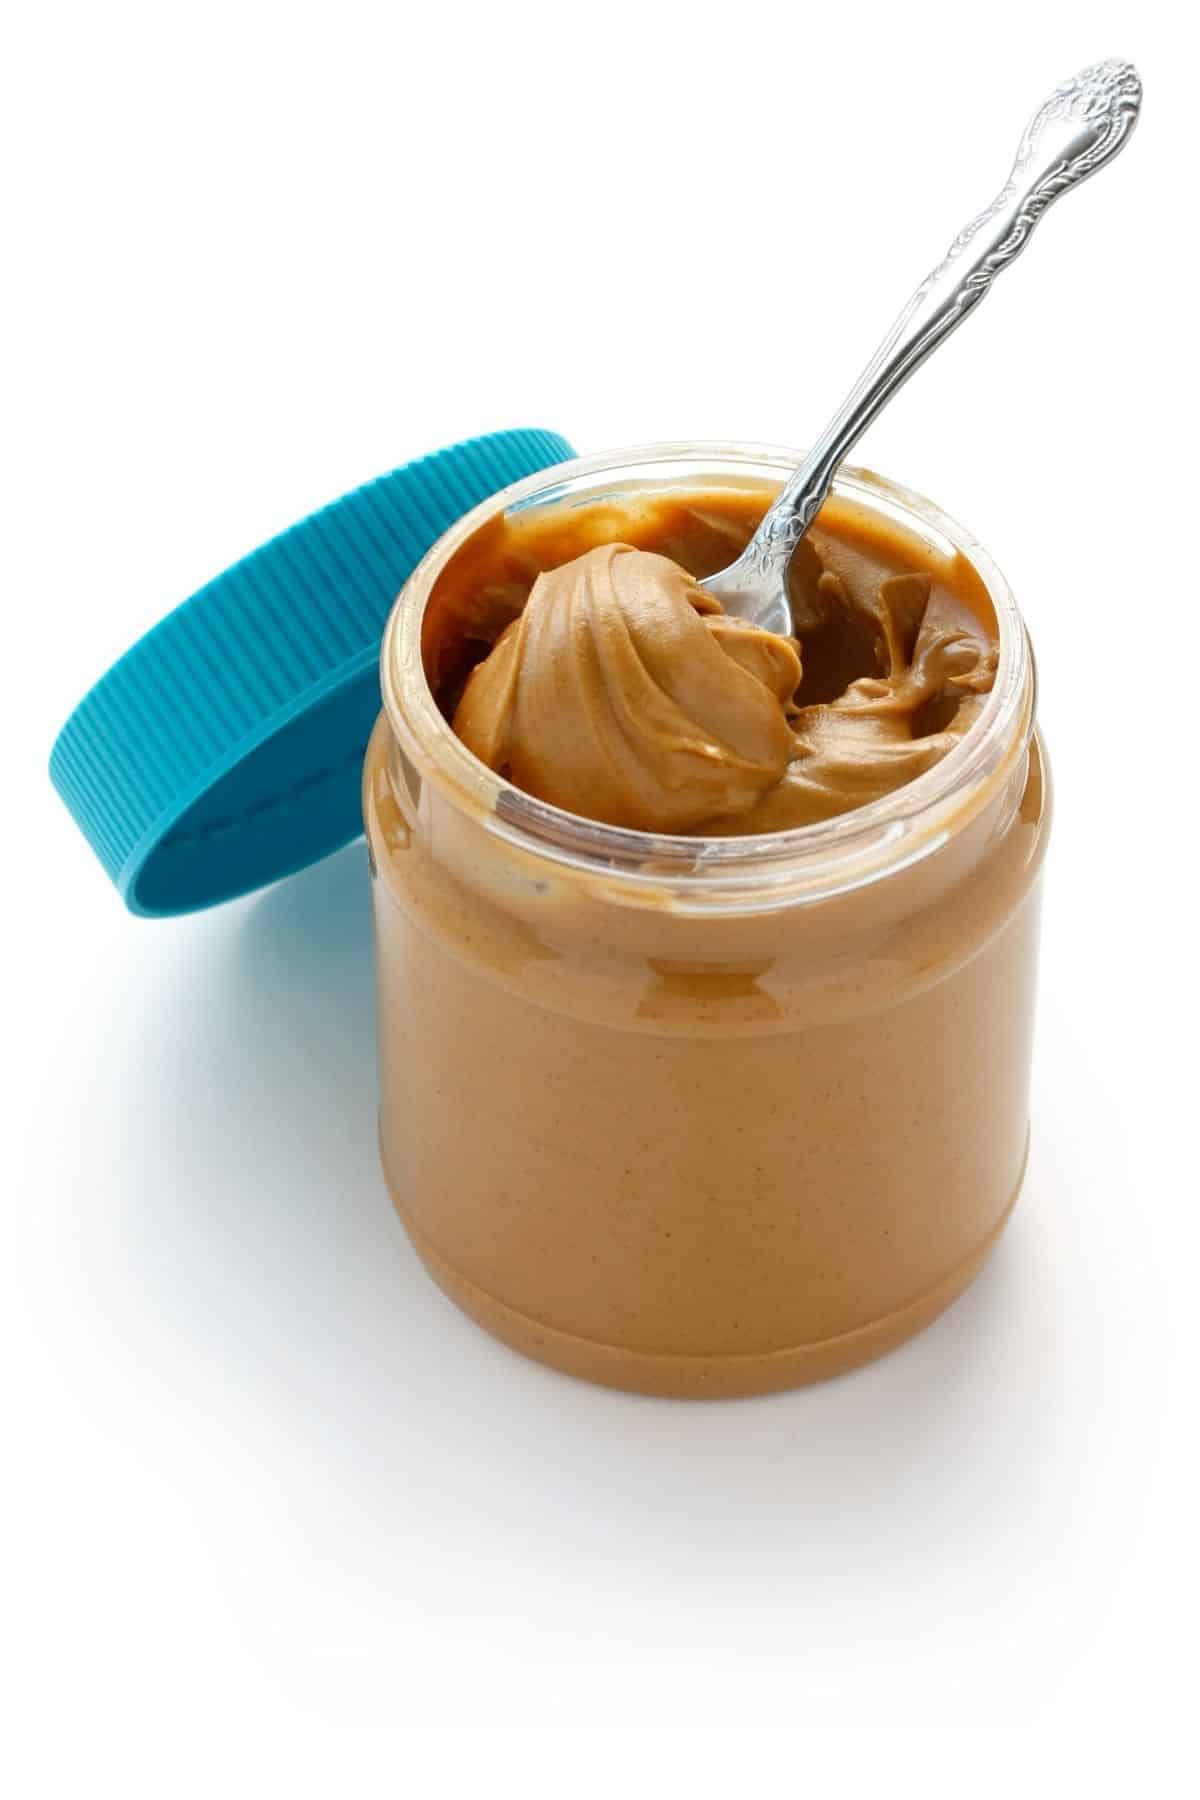 Peanut Butter Jar with Spoon